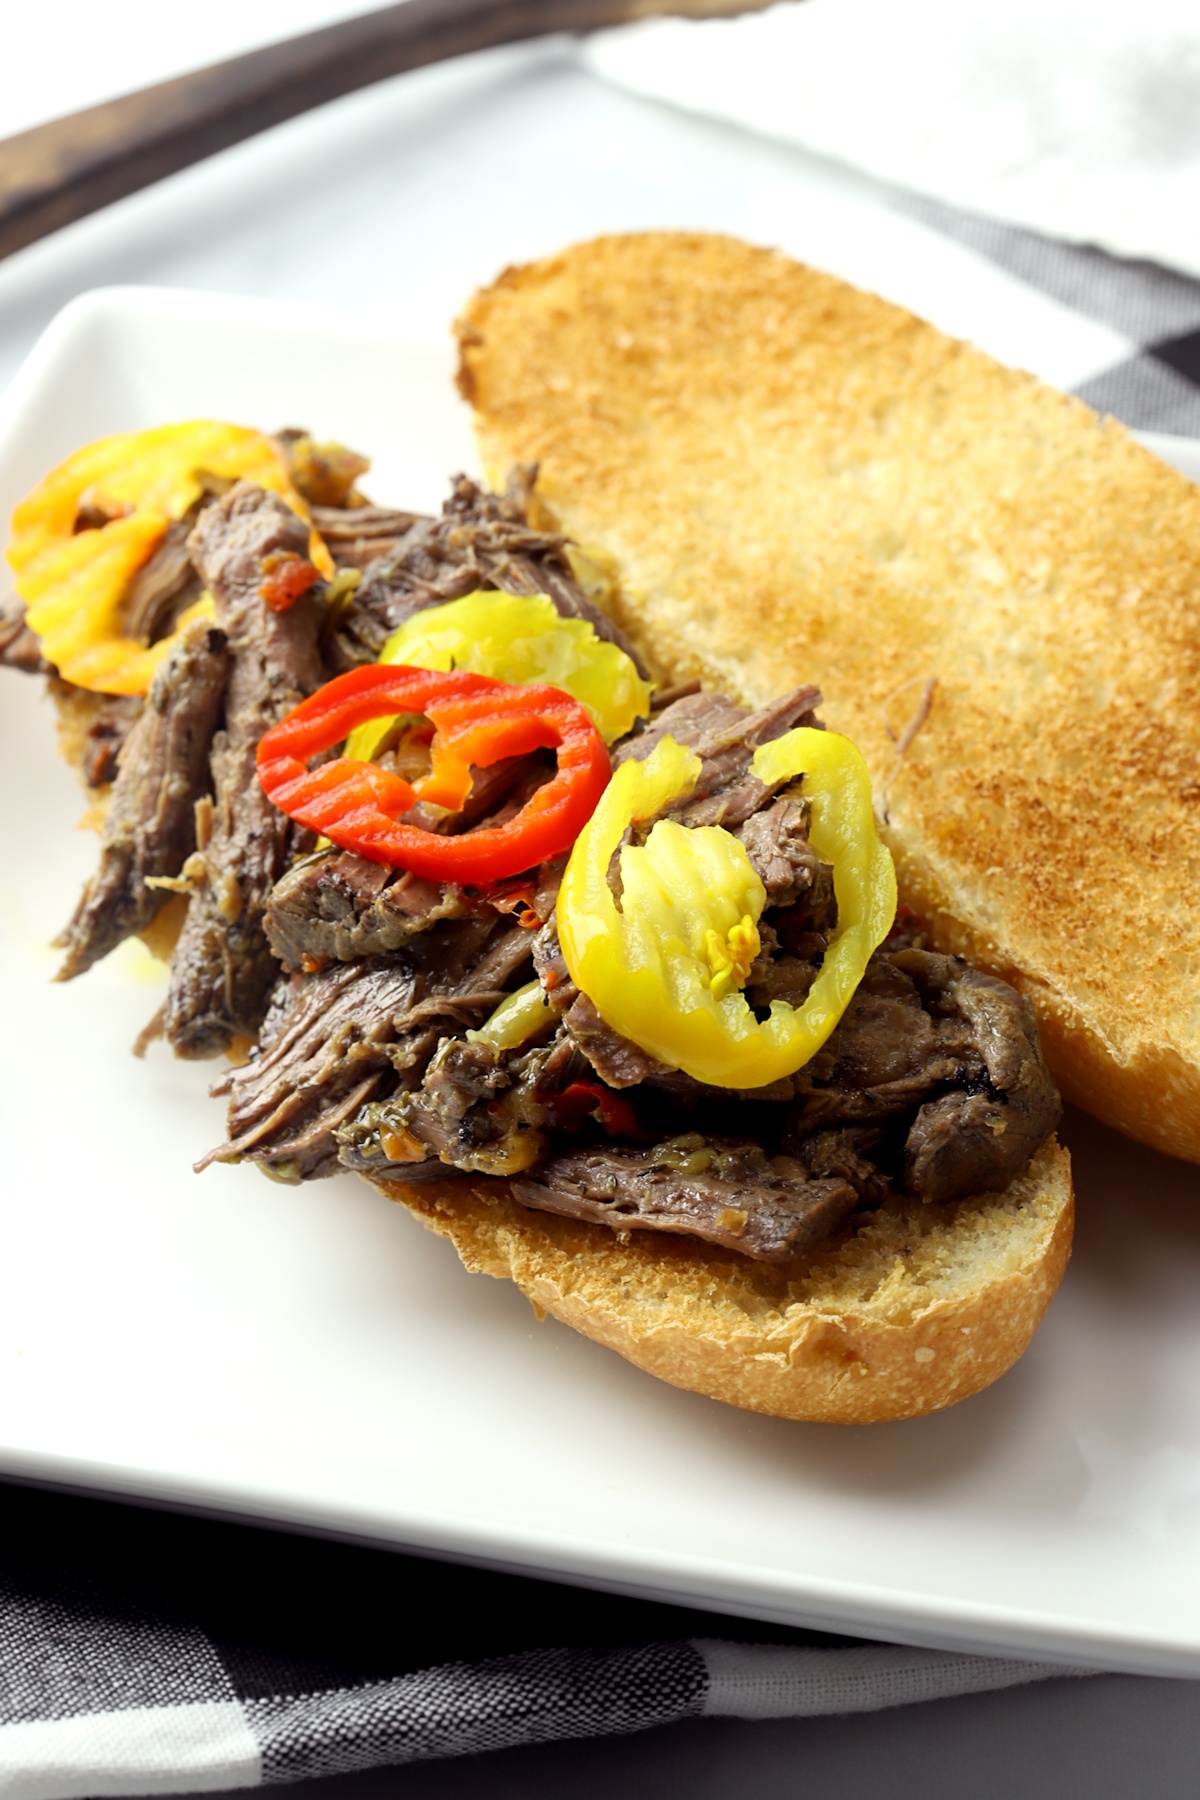 Italian beef sandwich topped with banana peppers.